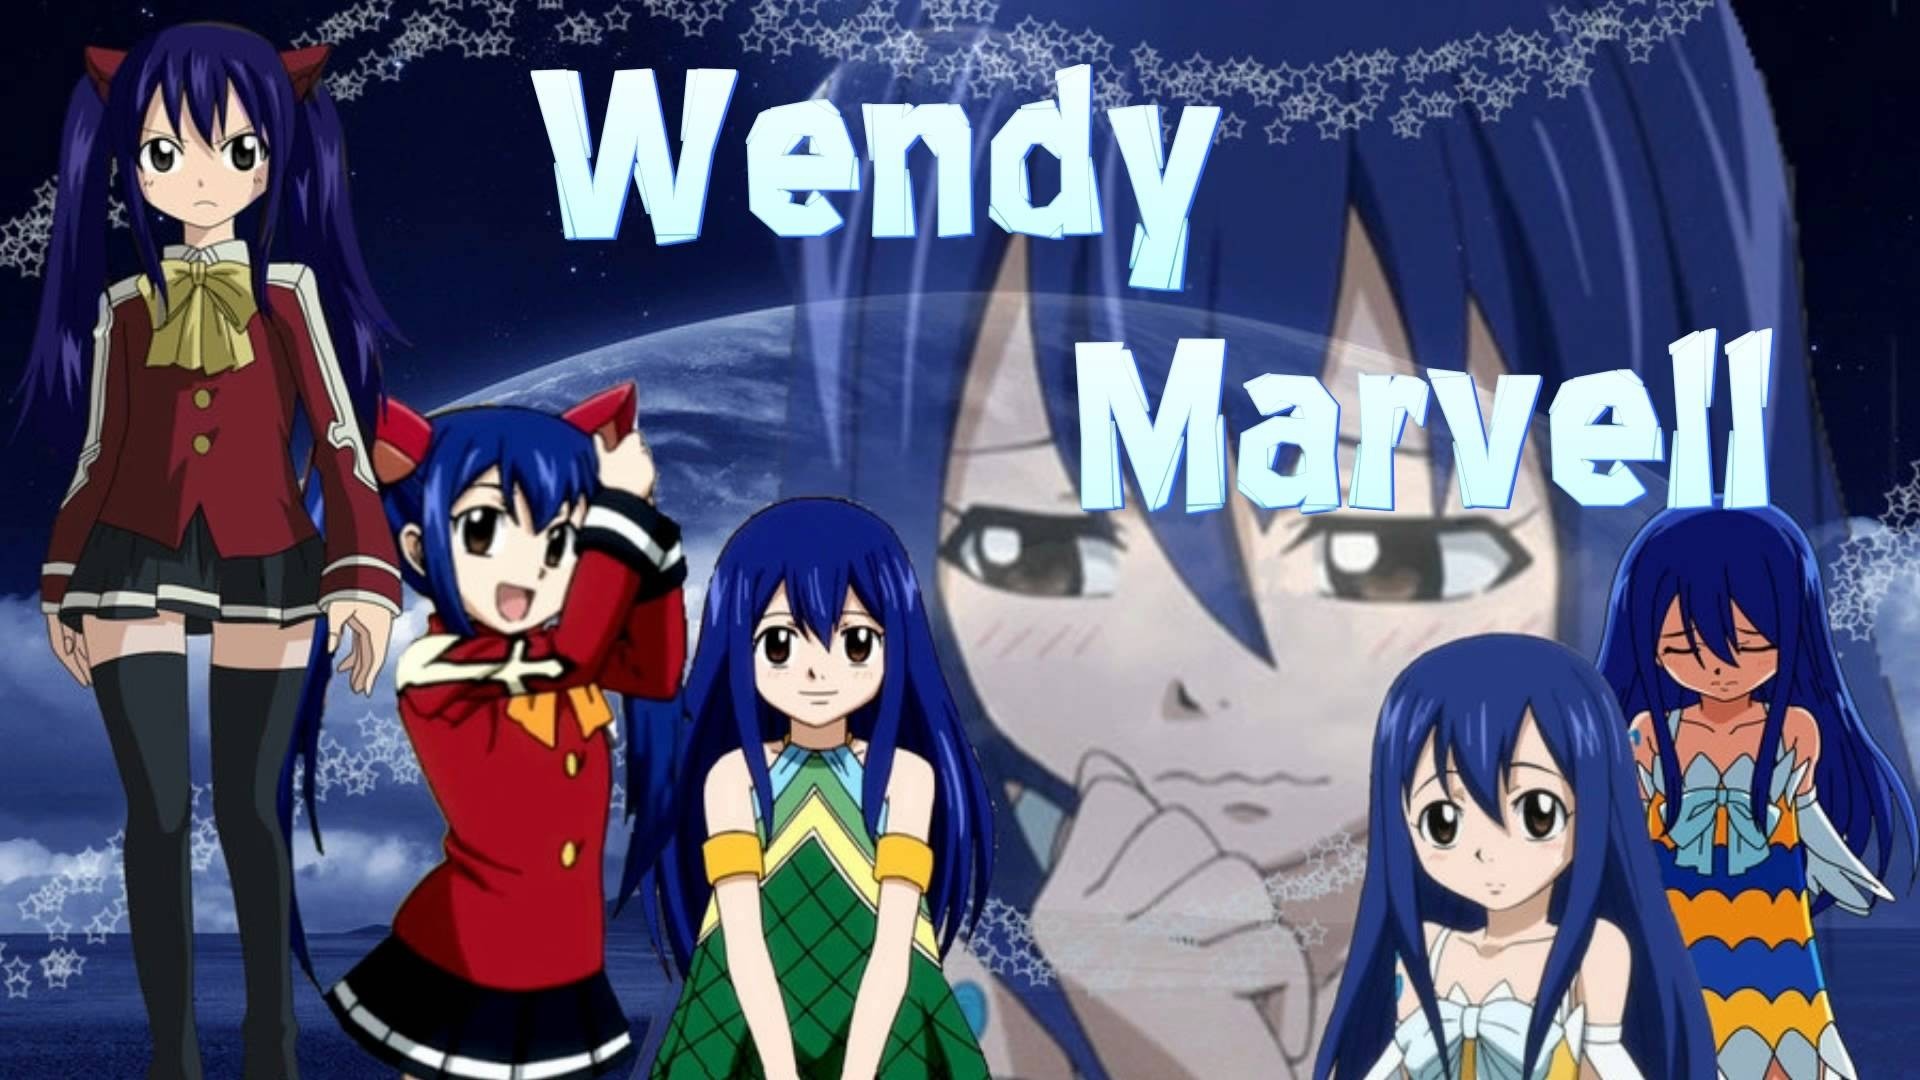 1920x1080 Wendy Marvell, Wendy Marvell Wallpaper